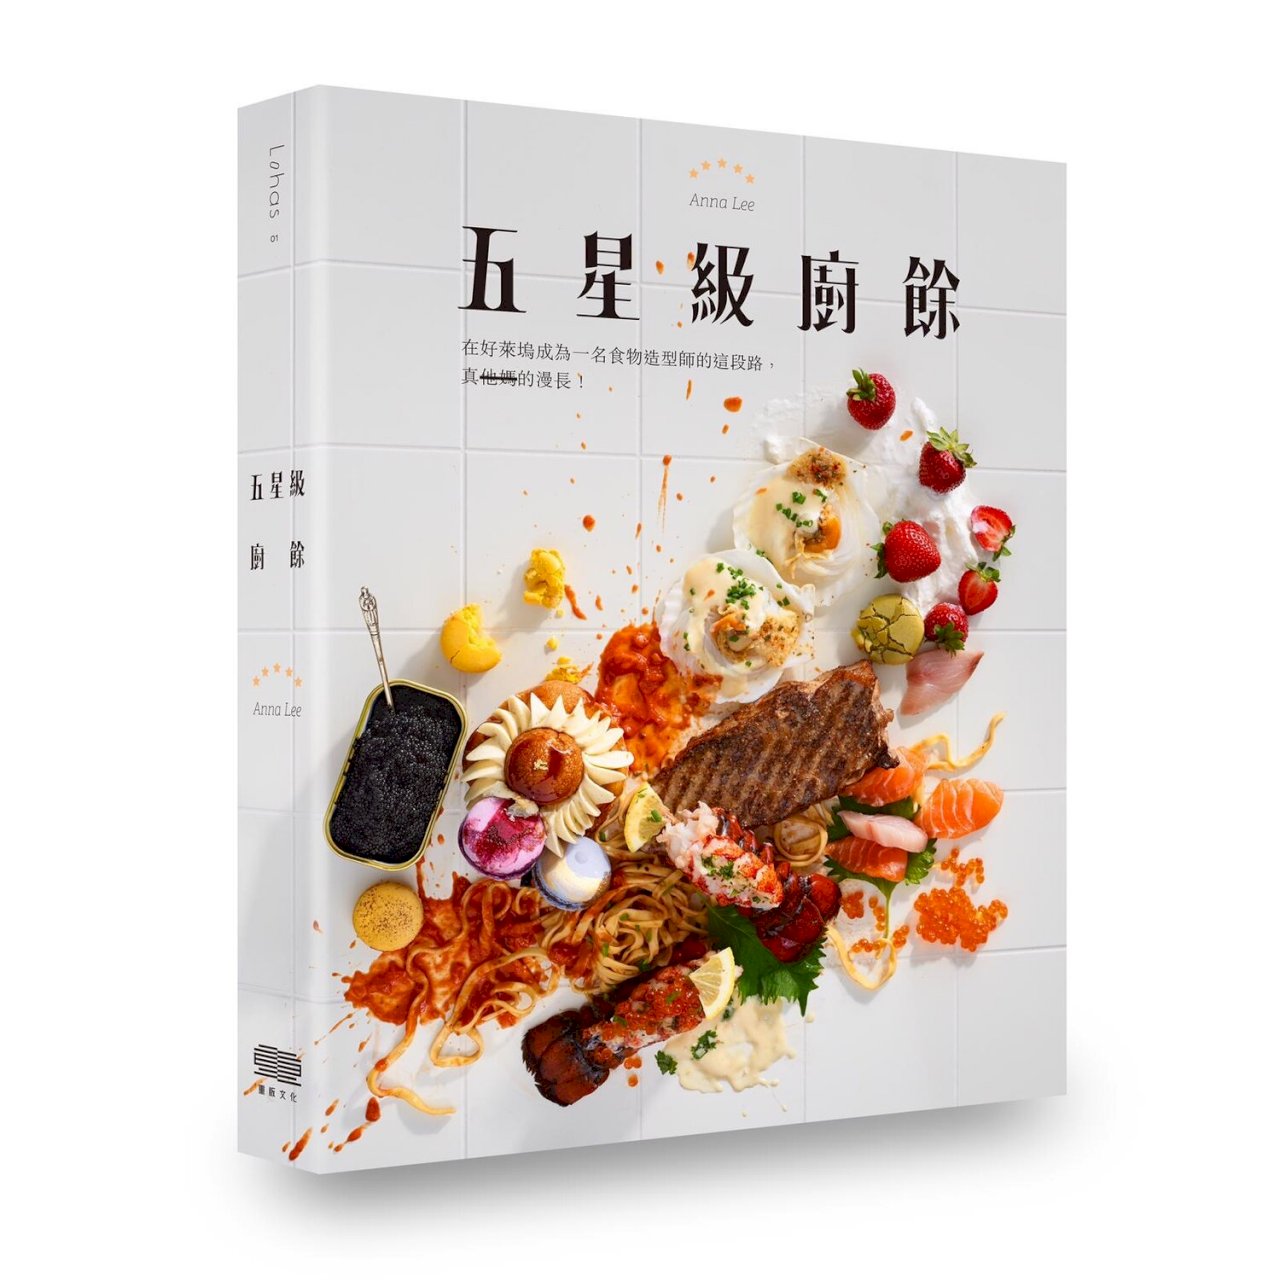 A food stylist from Taiwan